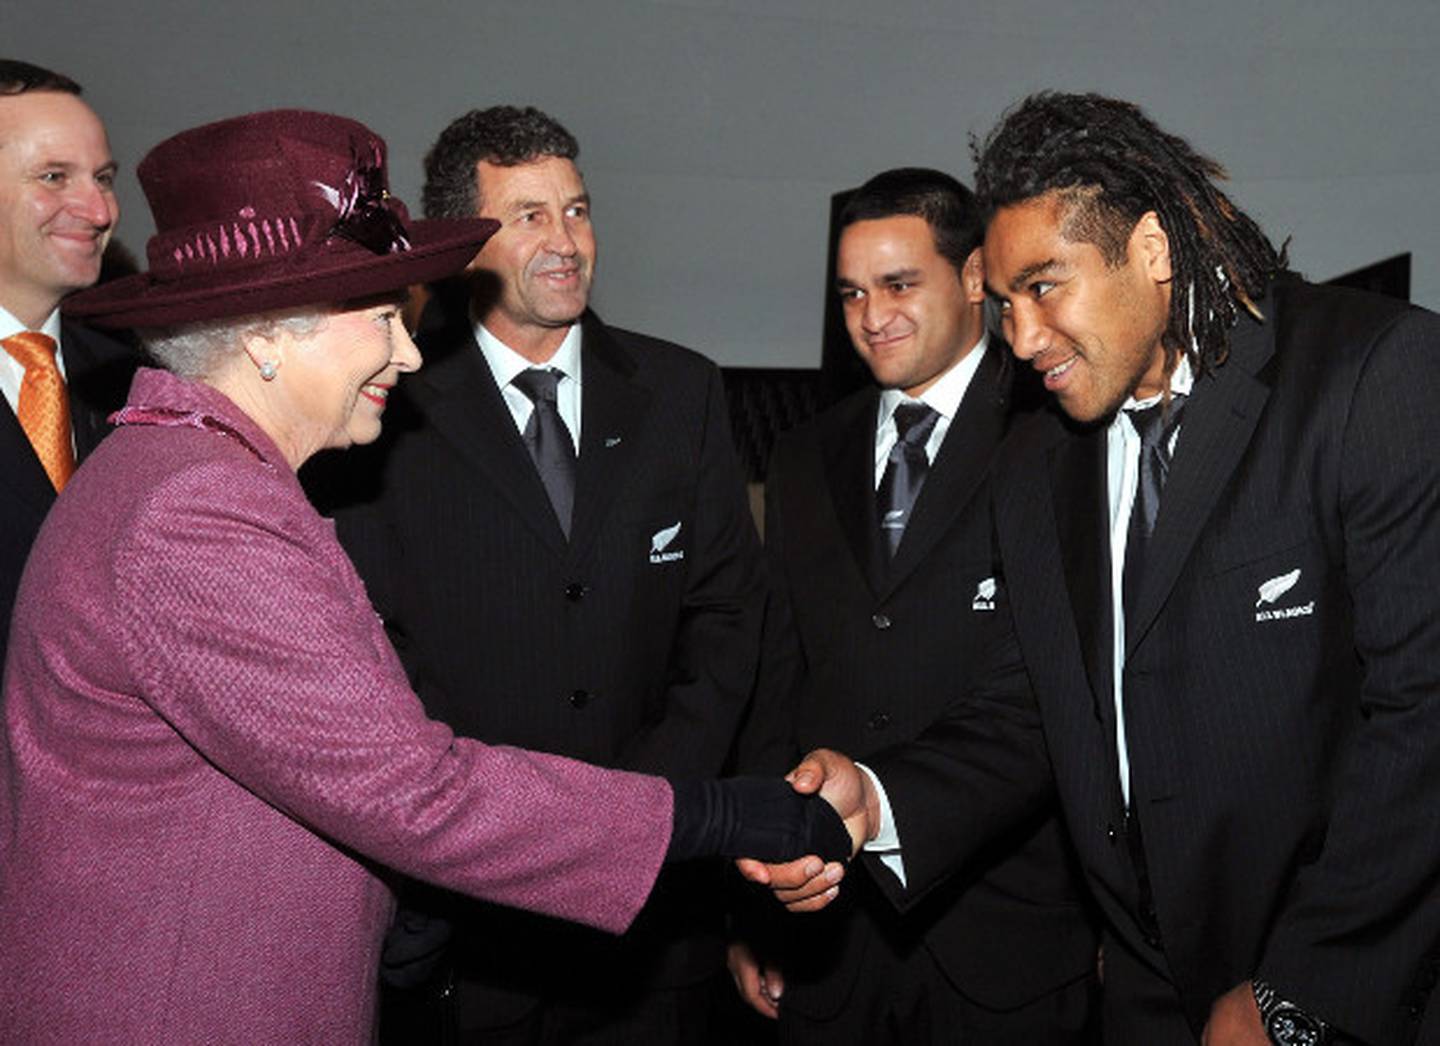 The Queen greets Wayne Smith (L), Piri Weepu (C) and Ma'a Nonu (R) at the 2008 event